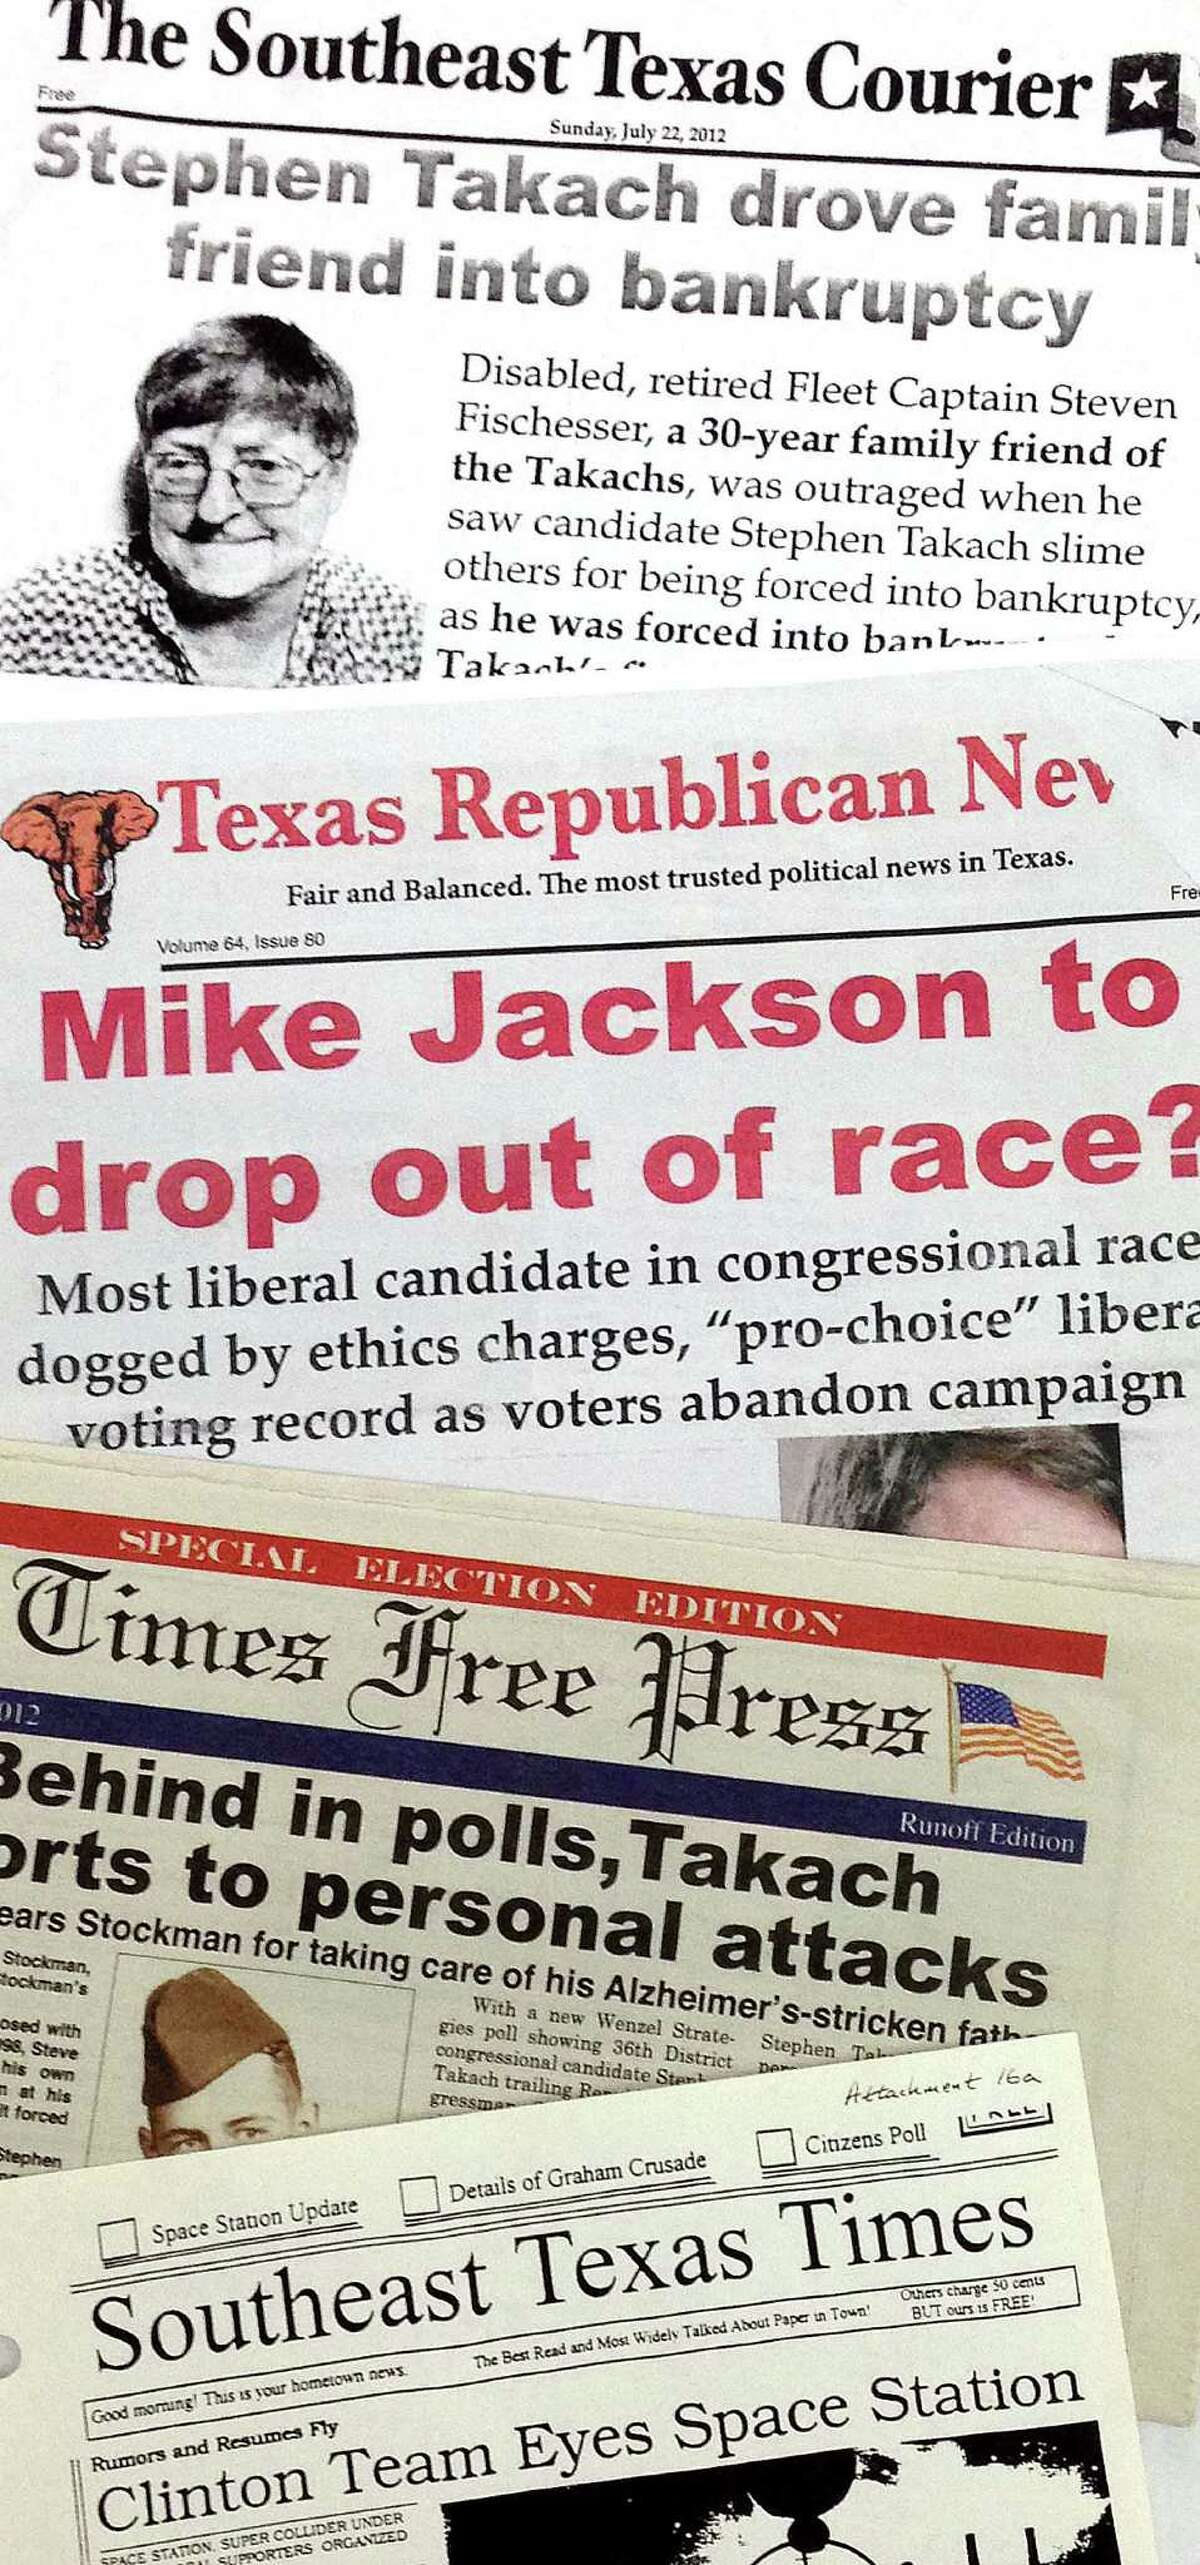 The Stockman campaign sent out about 400,000 "newspapers" in 2012. The newspapers distributed in 2012 were similar to one that was associated with the campaign in the 1990s called the Southeast Texas Times. A copy of the 1990s publication is at the bottom of this photo, samples of others from 2012 are pictured above.